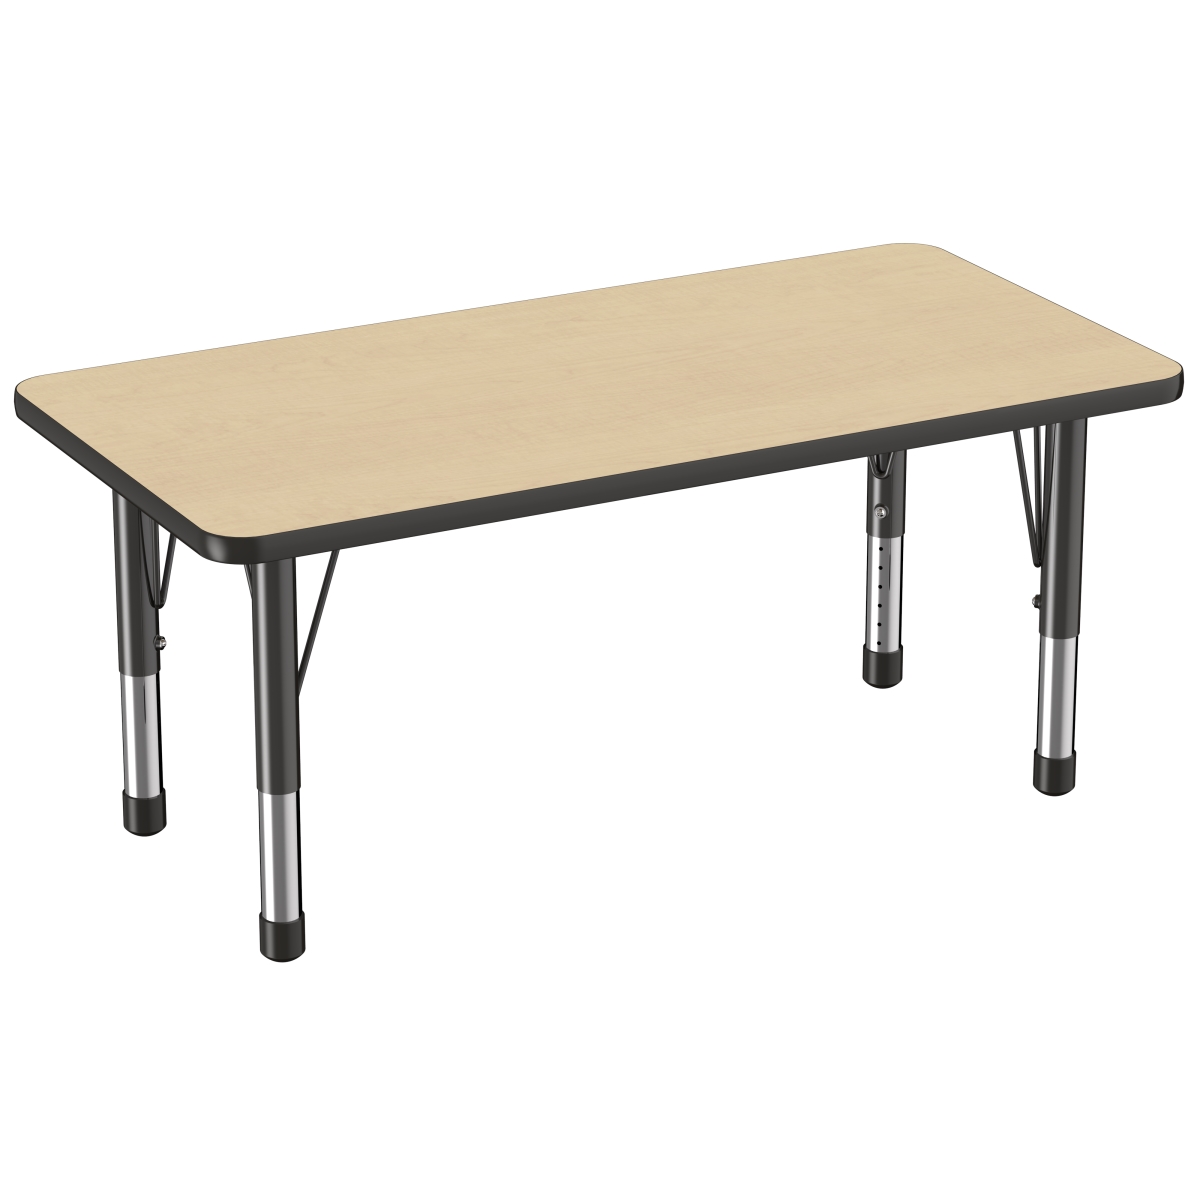 10009-mpbk 24 X 48 In. Rectangle T-mold Adjustable Activity Table With Chunky Leg - Maple & Black